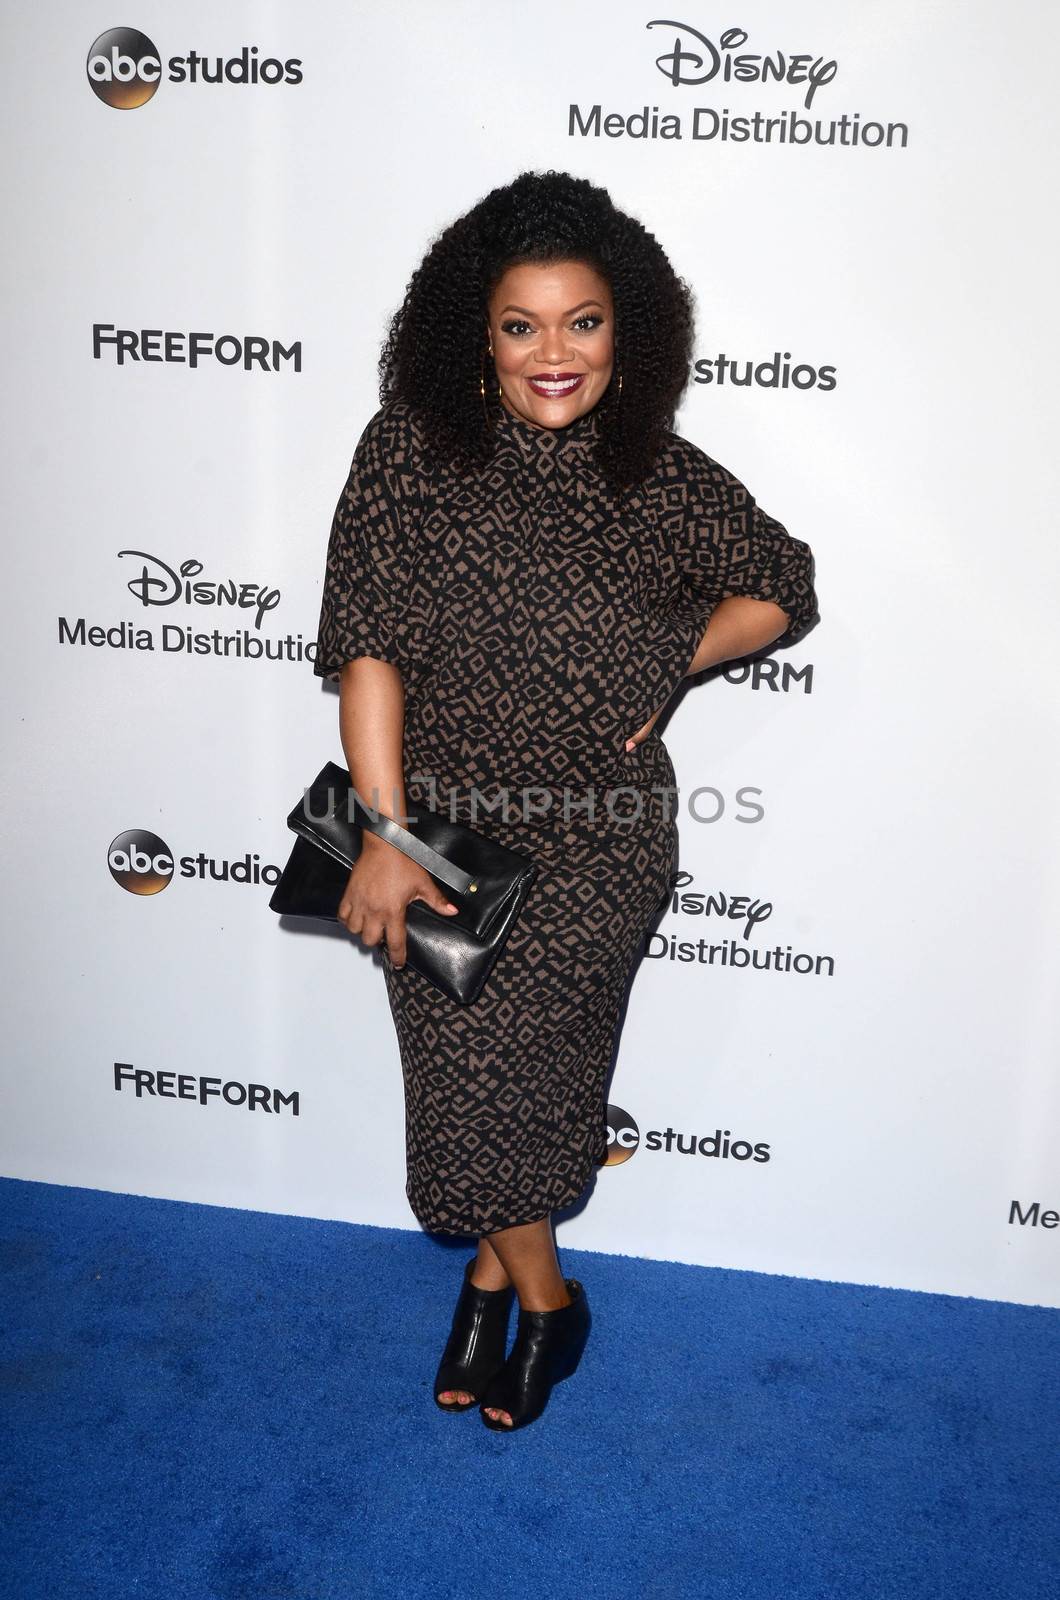 Yvette Nicole Brown
at the 2017 ABC International Upfronts, Disney Studios, Burbank, CA 05-21-17/ImageCollect by ImageCollect